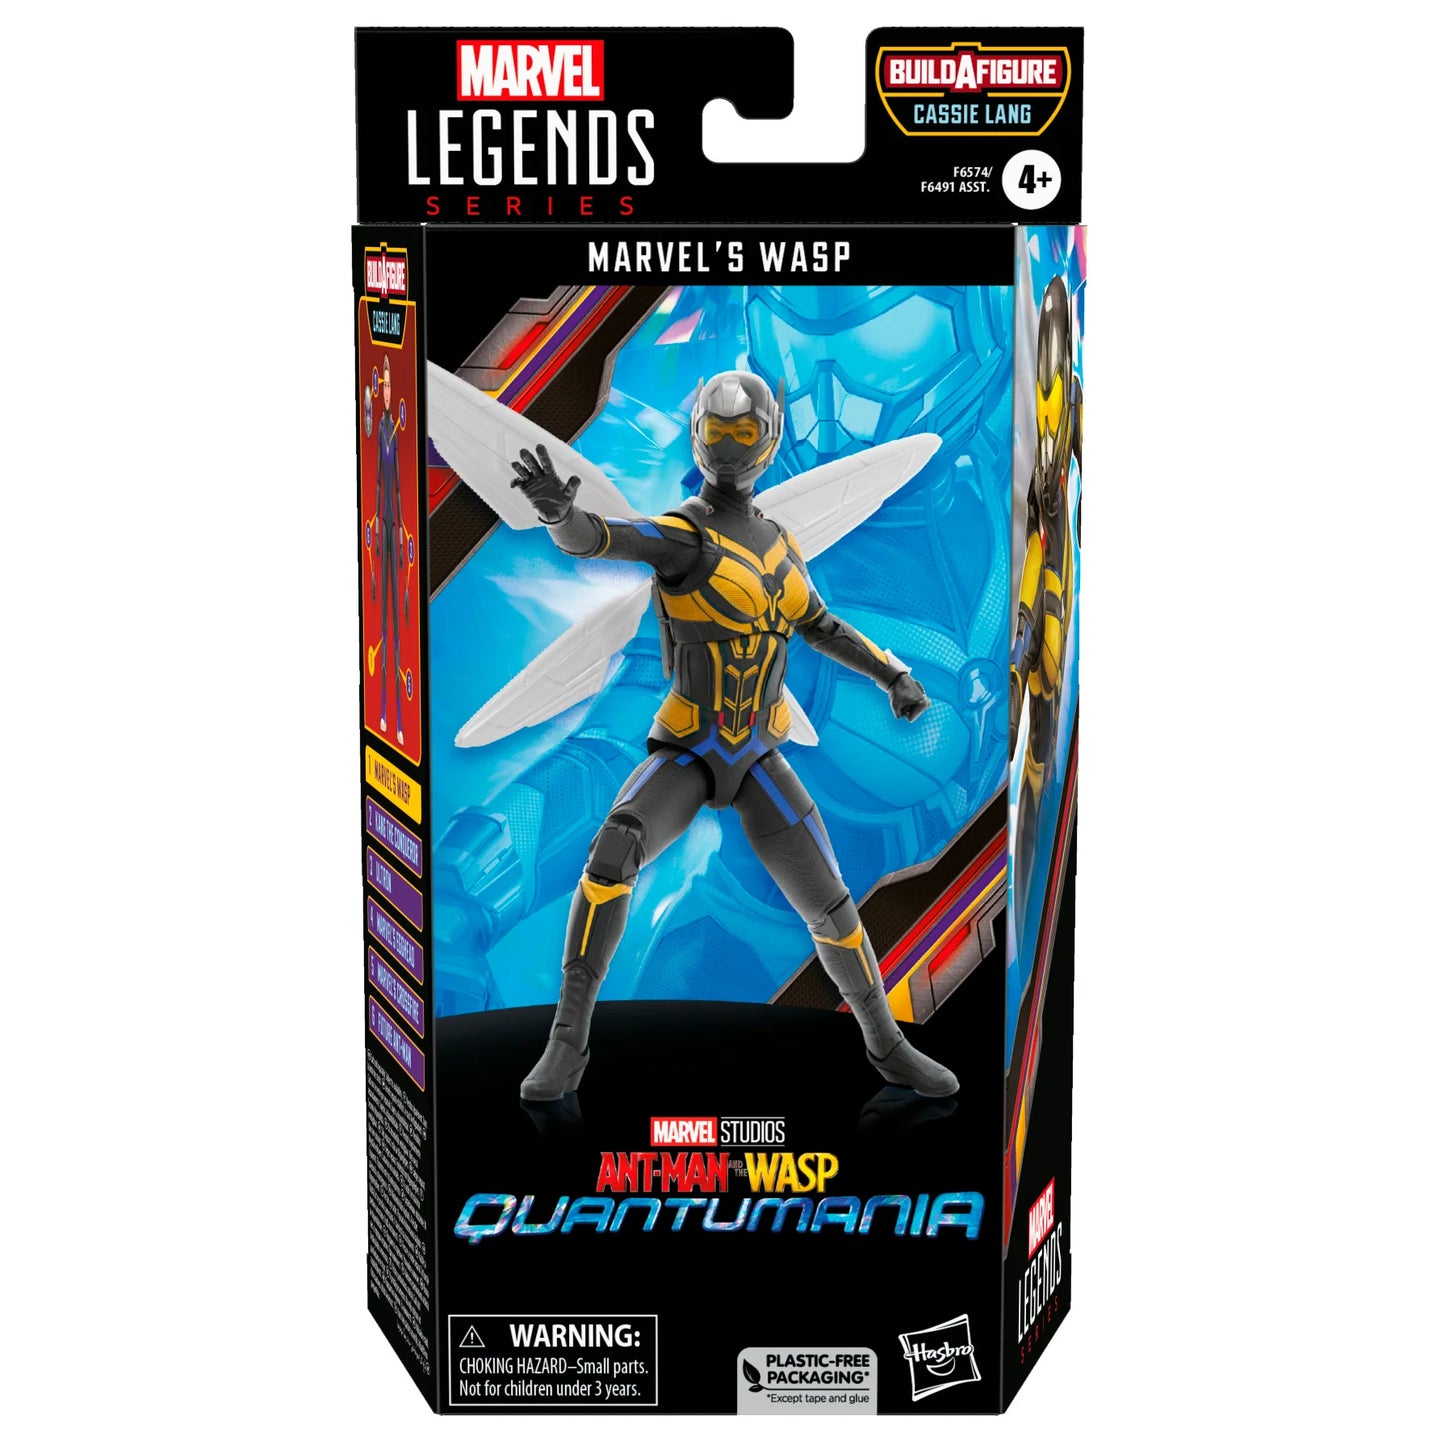 Marvel Ant-Man and Wasp: Quantumania - Marvel's Wasp - Legends Series Action Figure